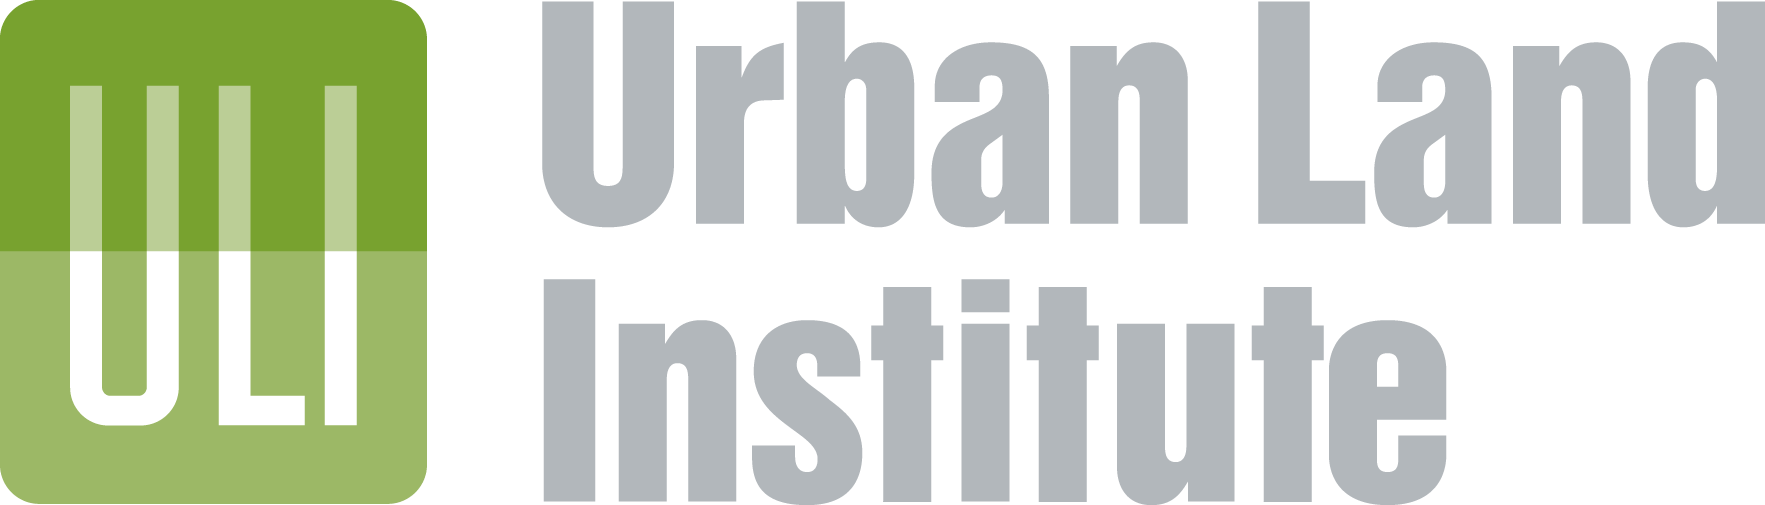 Urban Land Institute Seeking Nominations for Annual Housing Awards